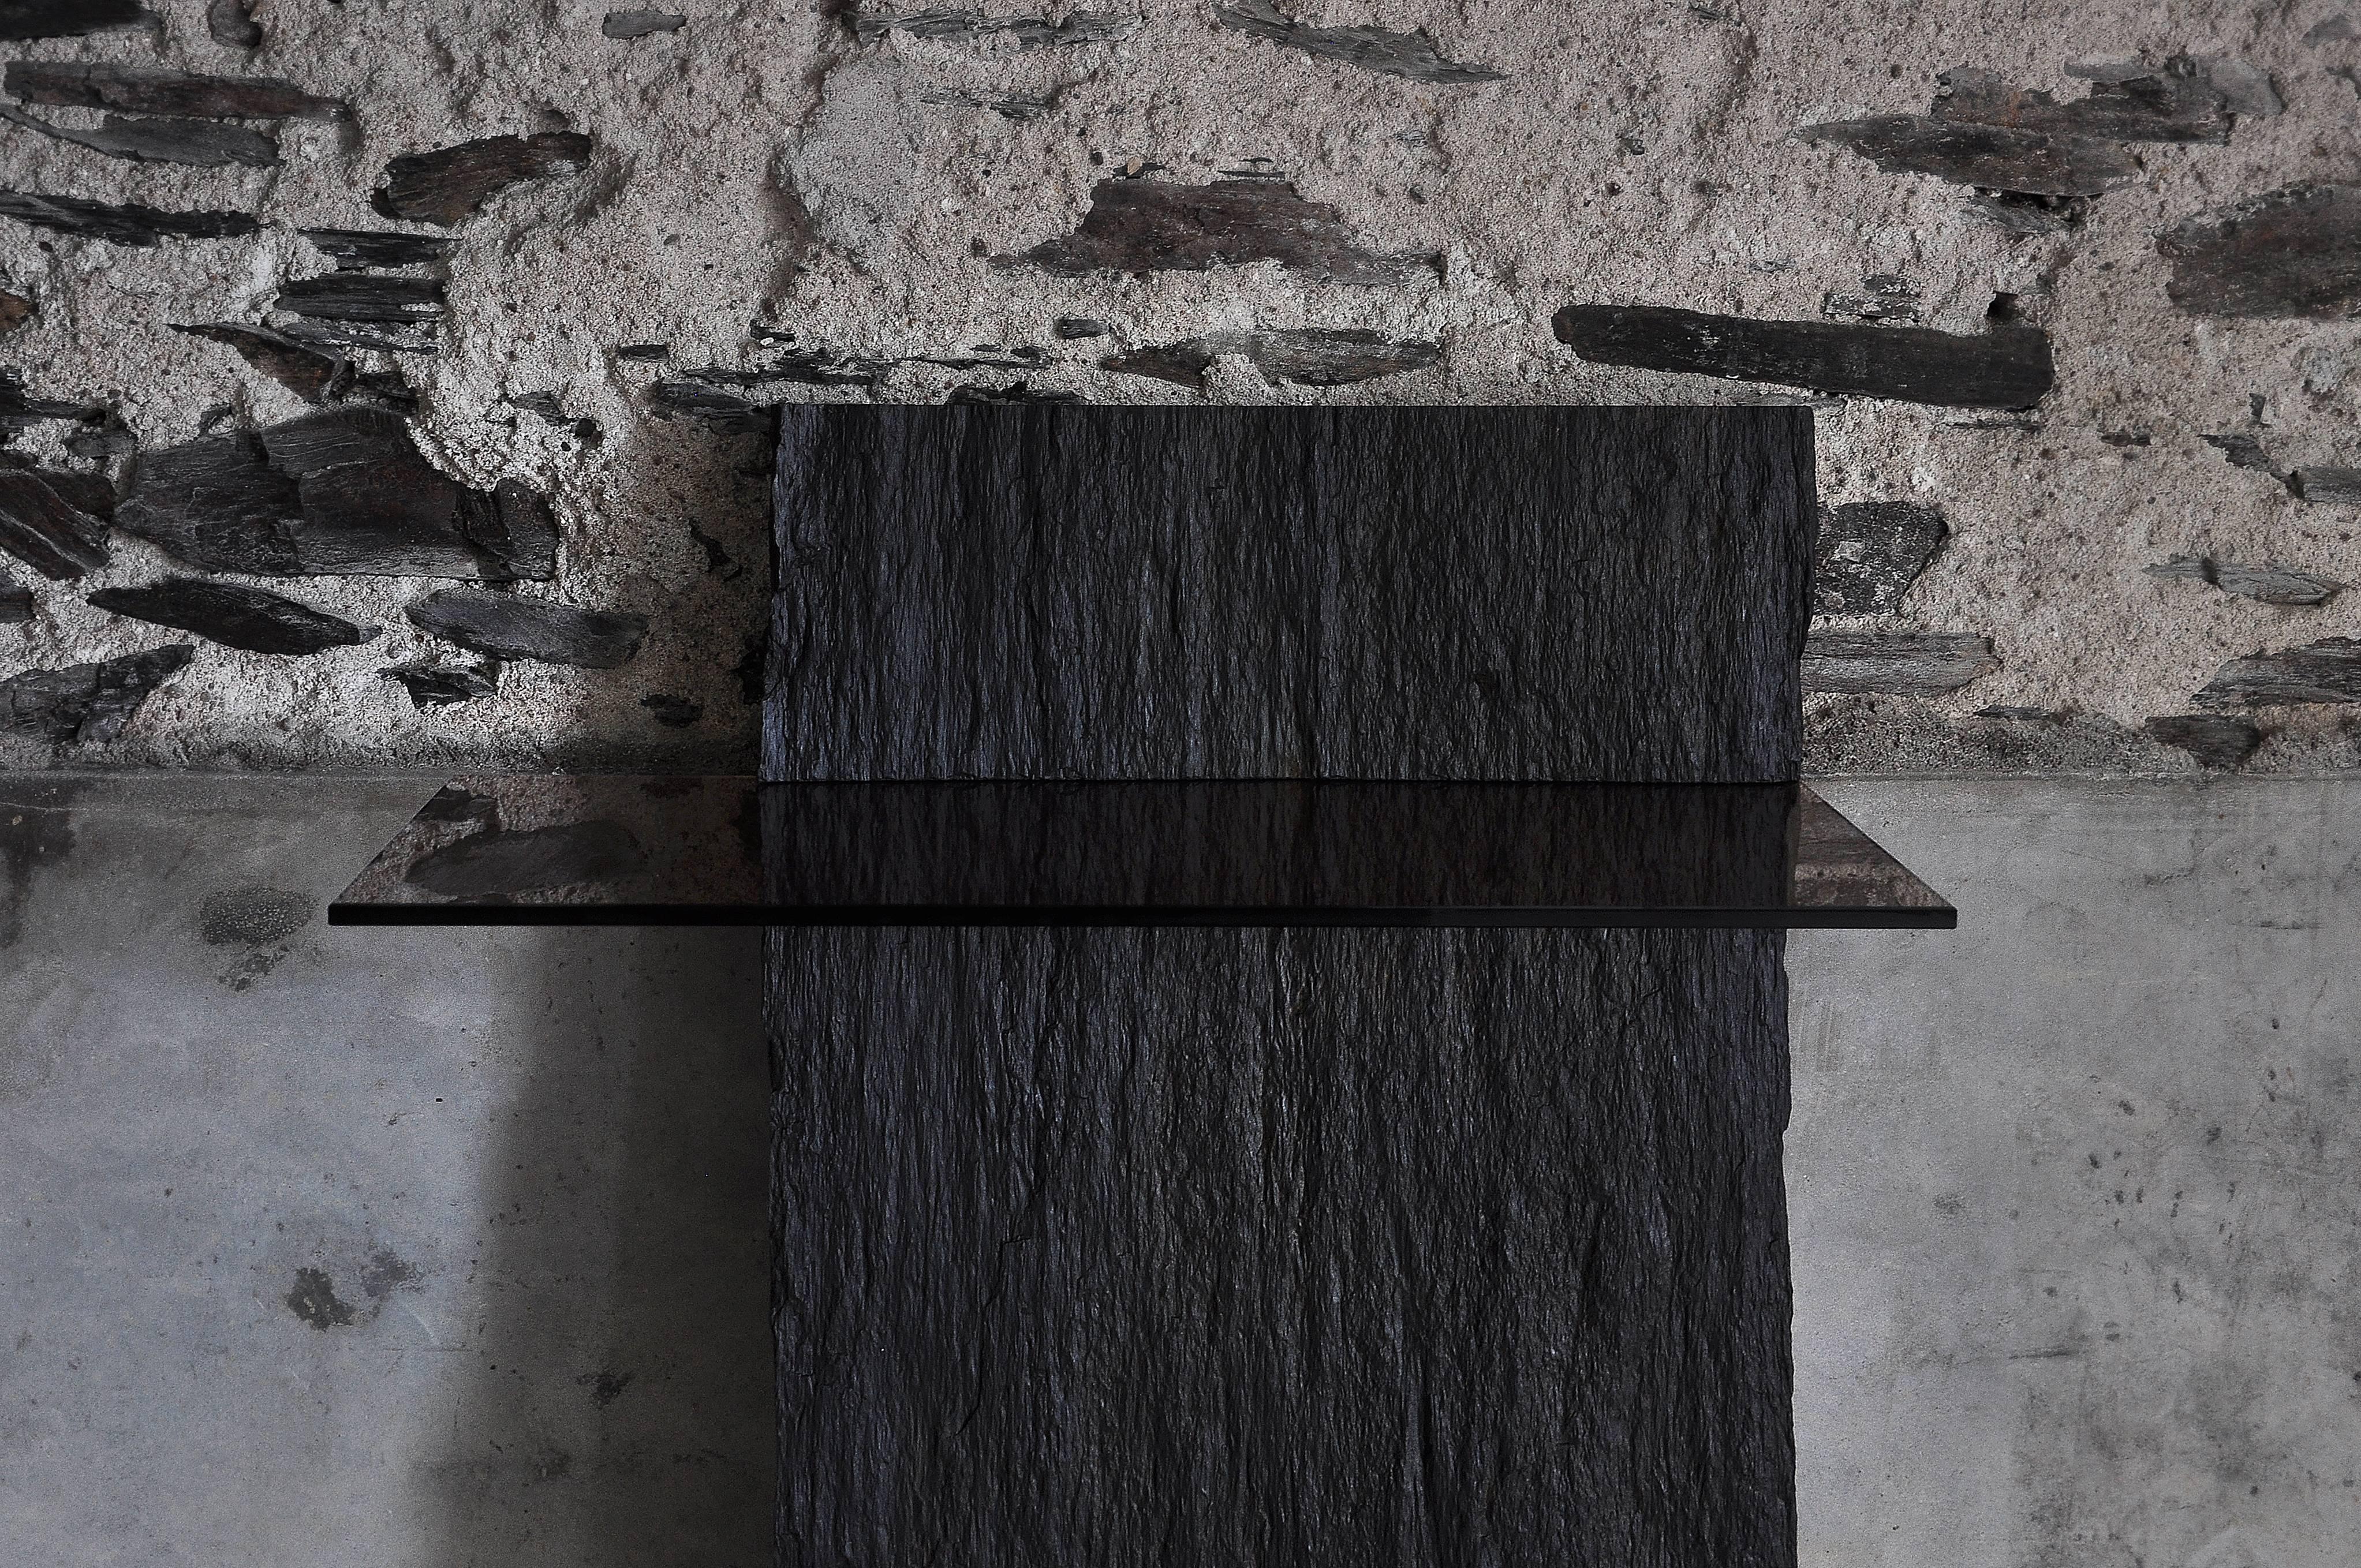 Habile console.
Fre´de´ric Saulou.
Materials: Black slate, bronze glass.
 Dimensions: 110 x 52 x 50 cm.

 Edition of eight.
 Signed and numbered.

 “While wandering in the streets I have been observing buildings
 construction toward the sky